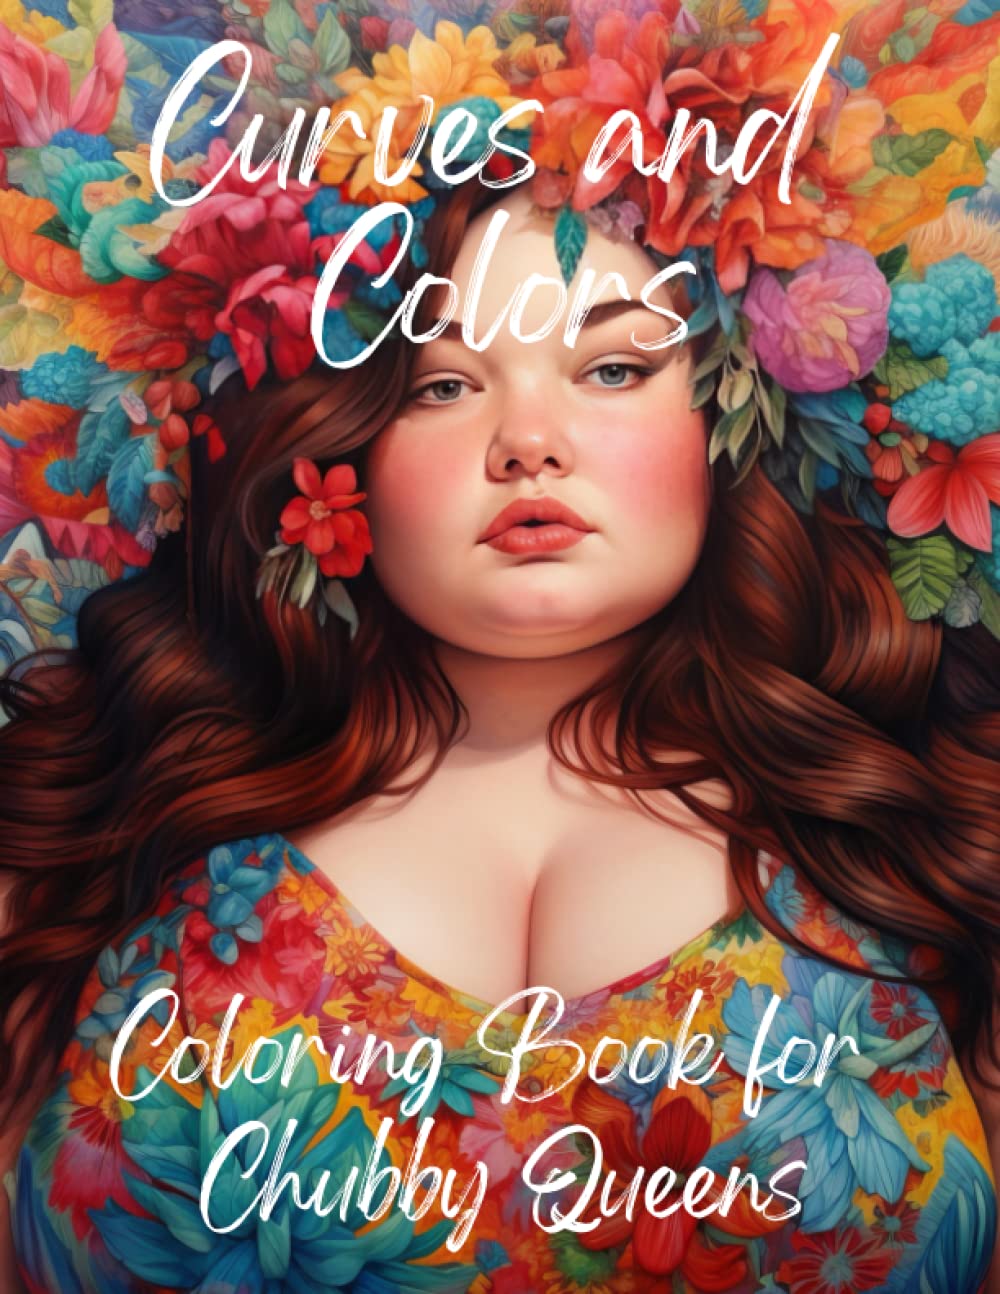 Curves and Colors Coloring Book for Chubby Queens: 40 Curvy Goddesses To Colorize | 8.5